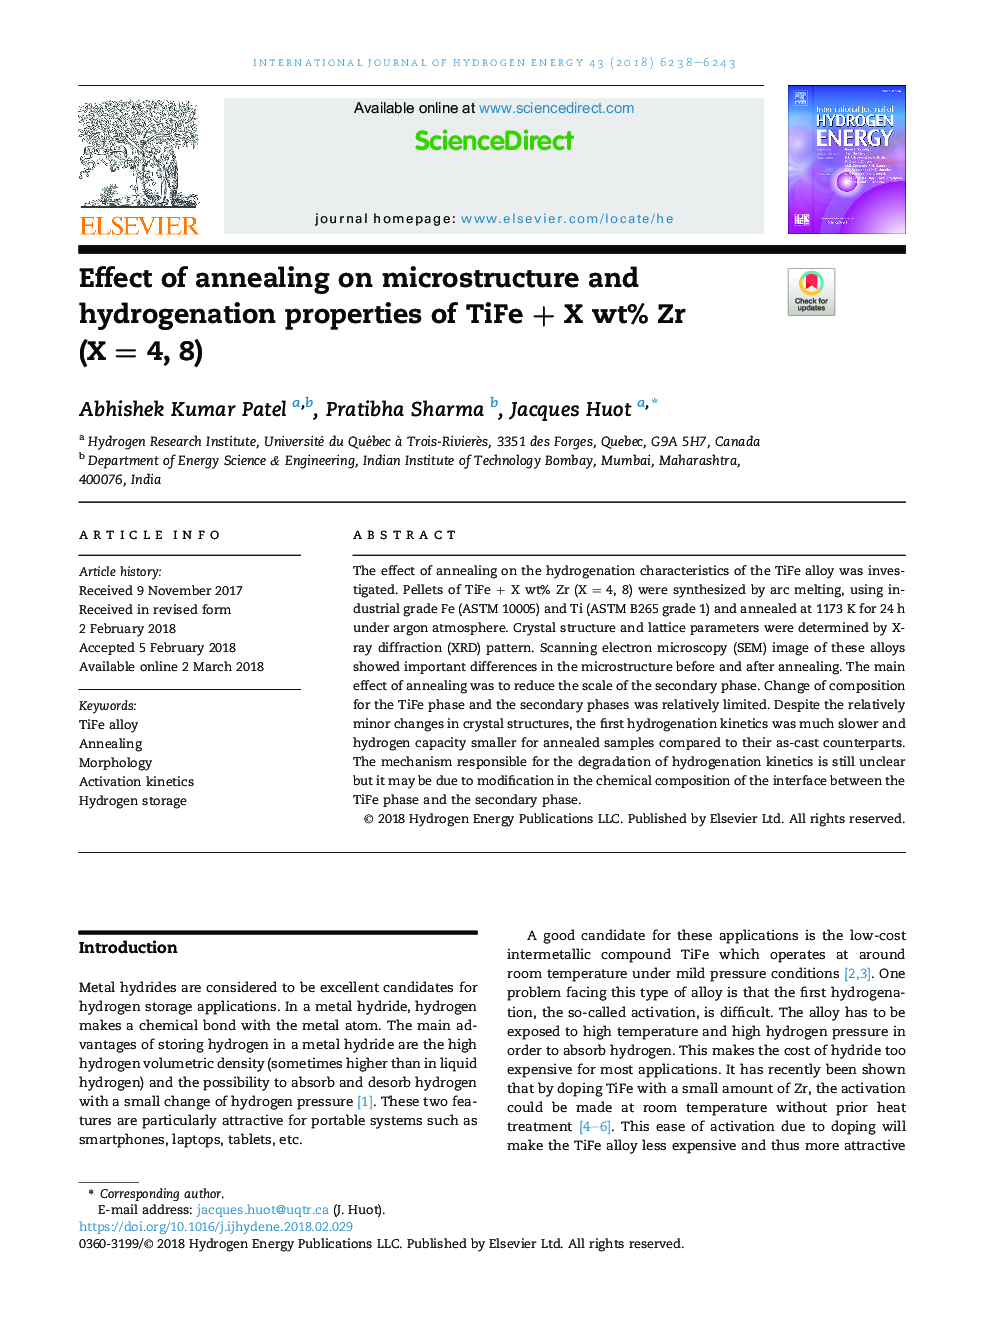 Effect of annealing on microstructure and hydrogenation properties of TiFeÂ +Â XÂ wt% Zr (XÂ =Â 4, 8)